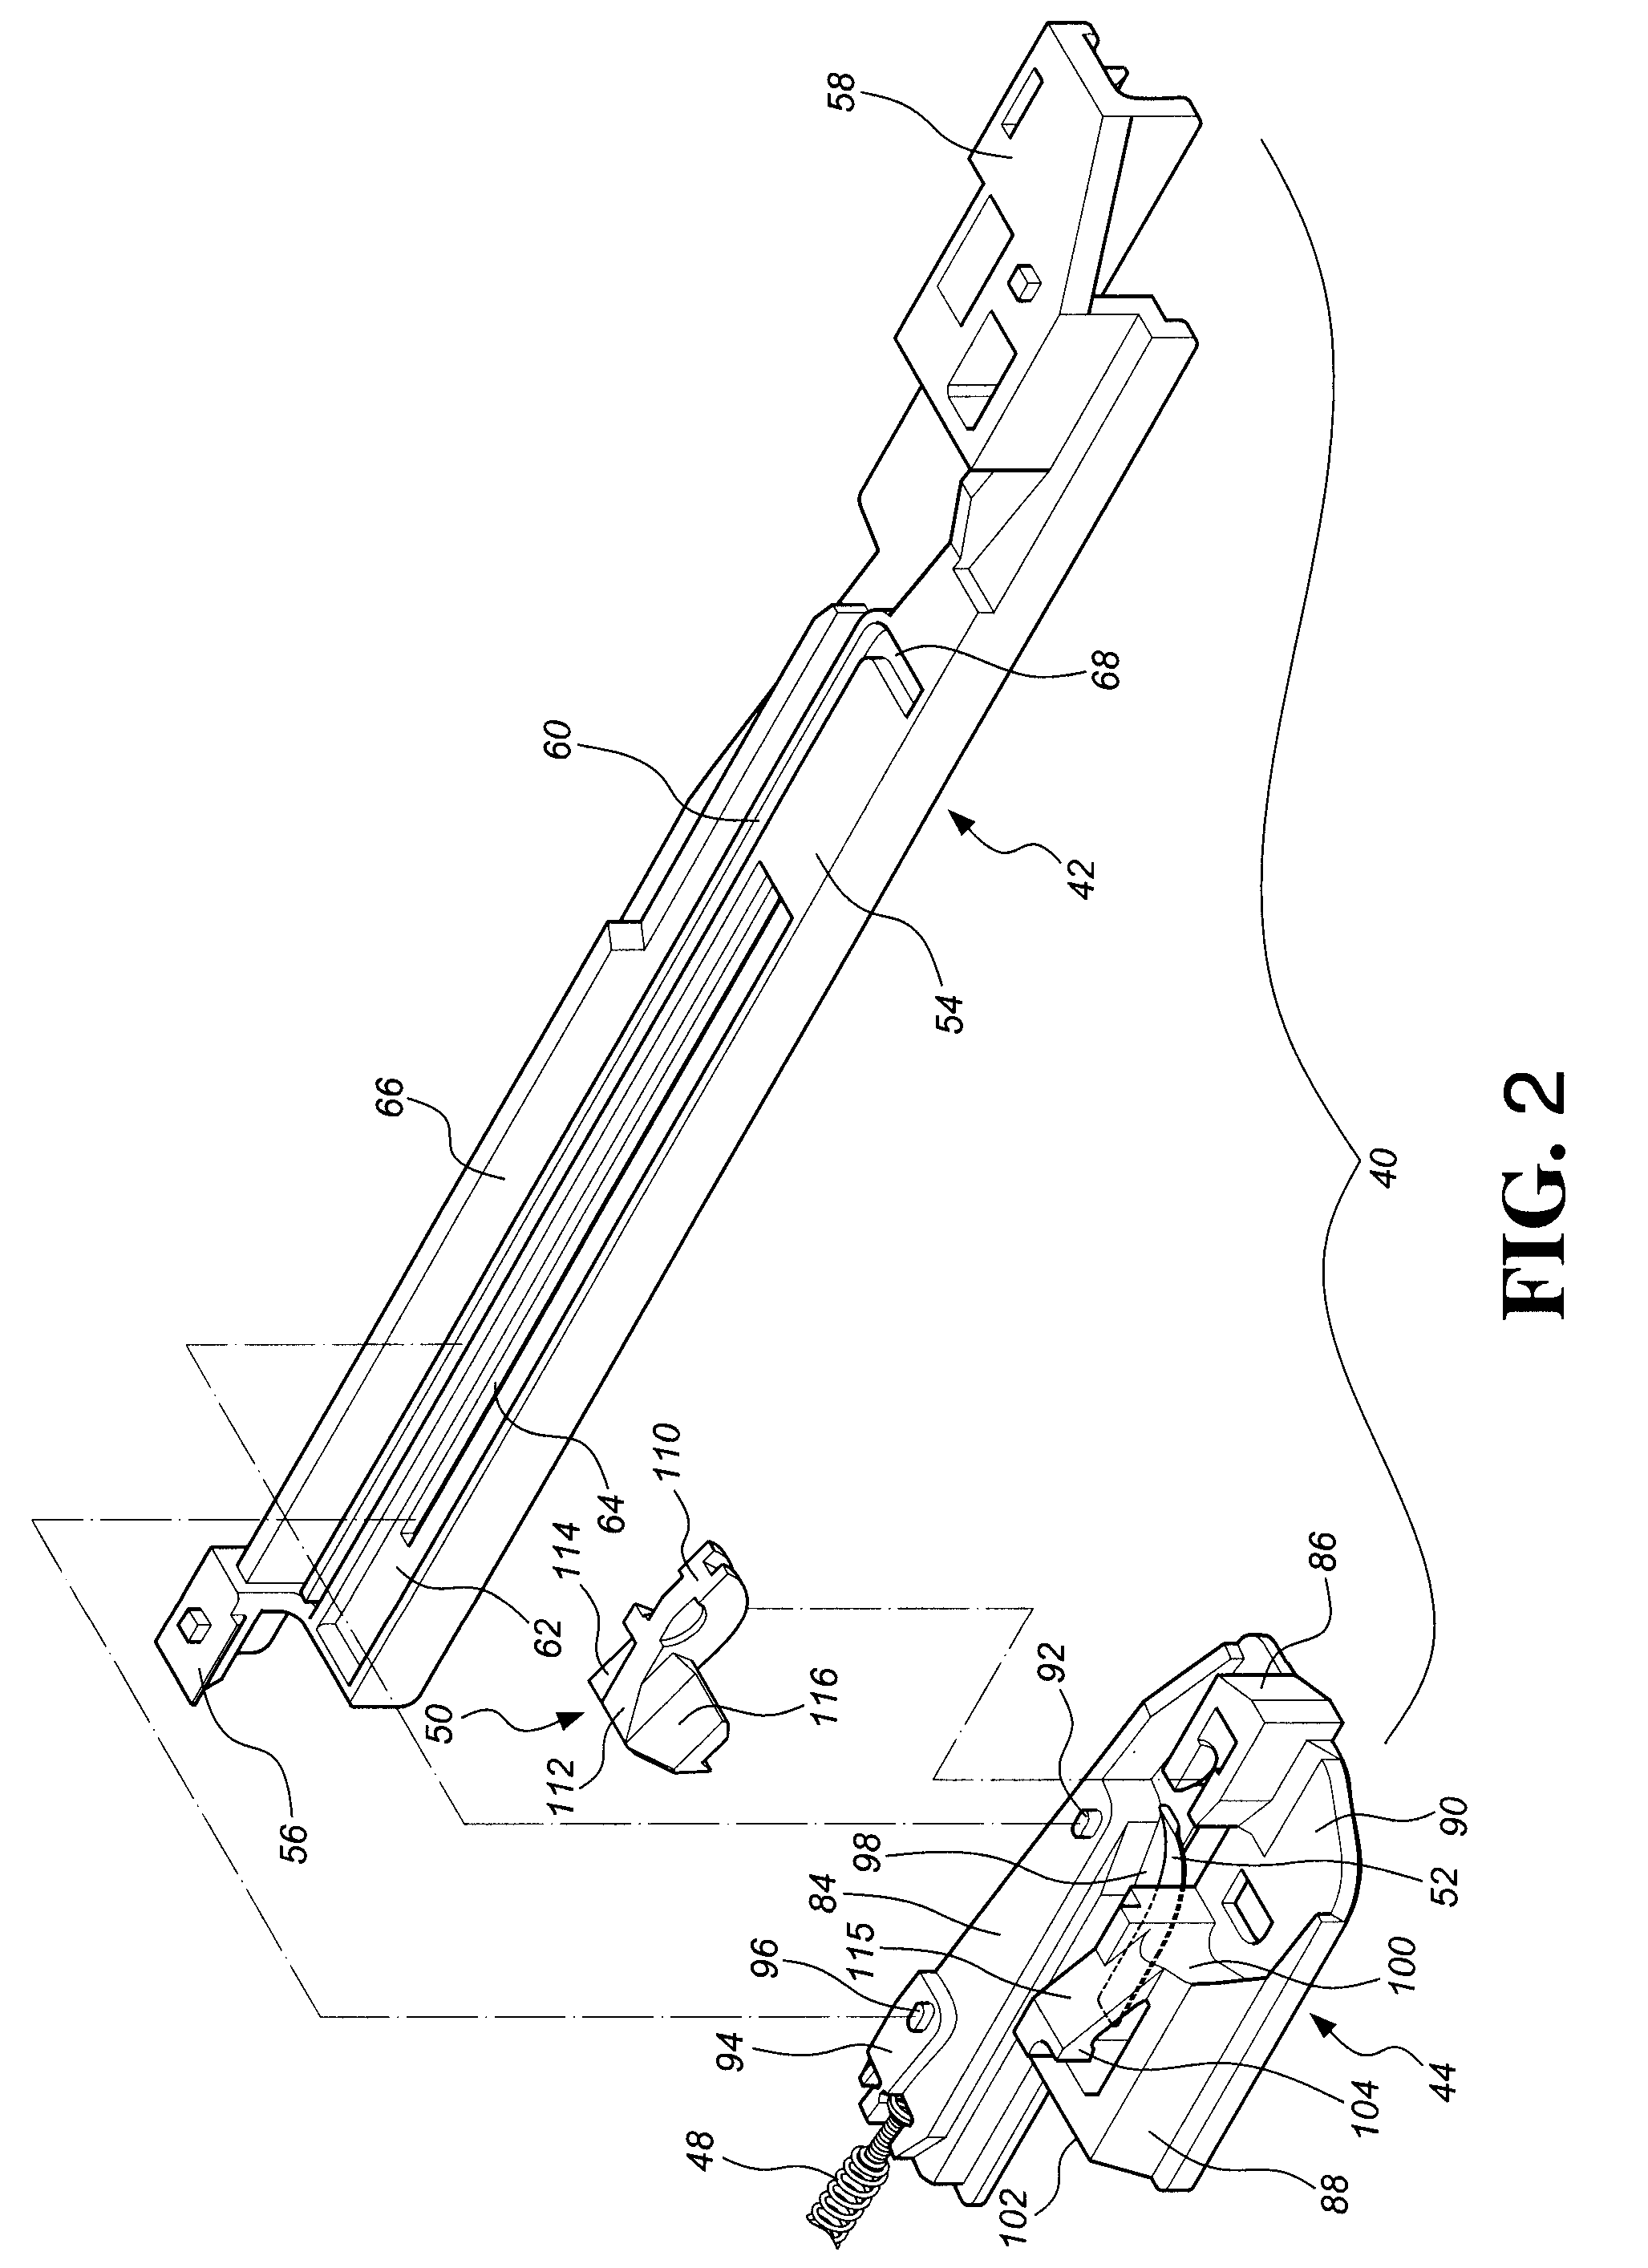 Self-moving device for movable furniture parts